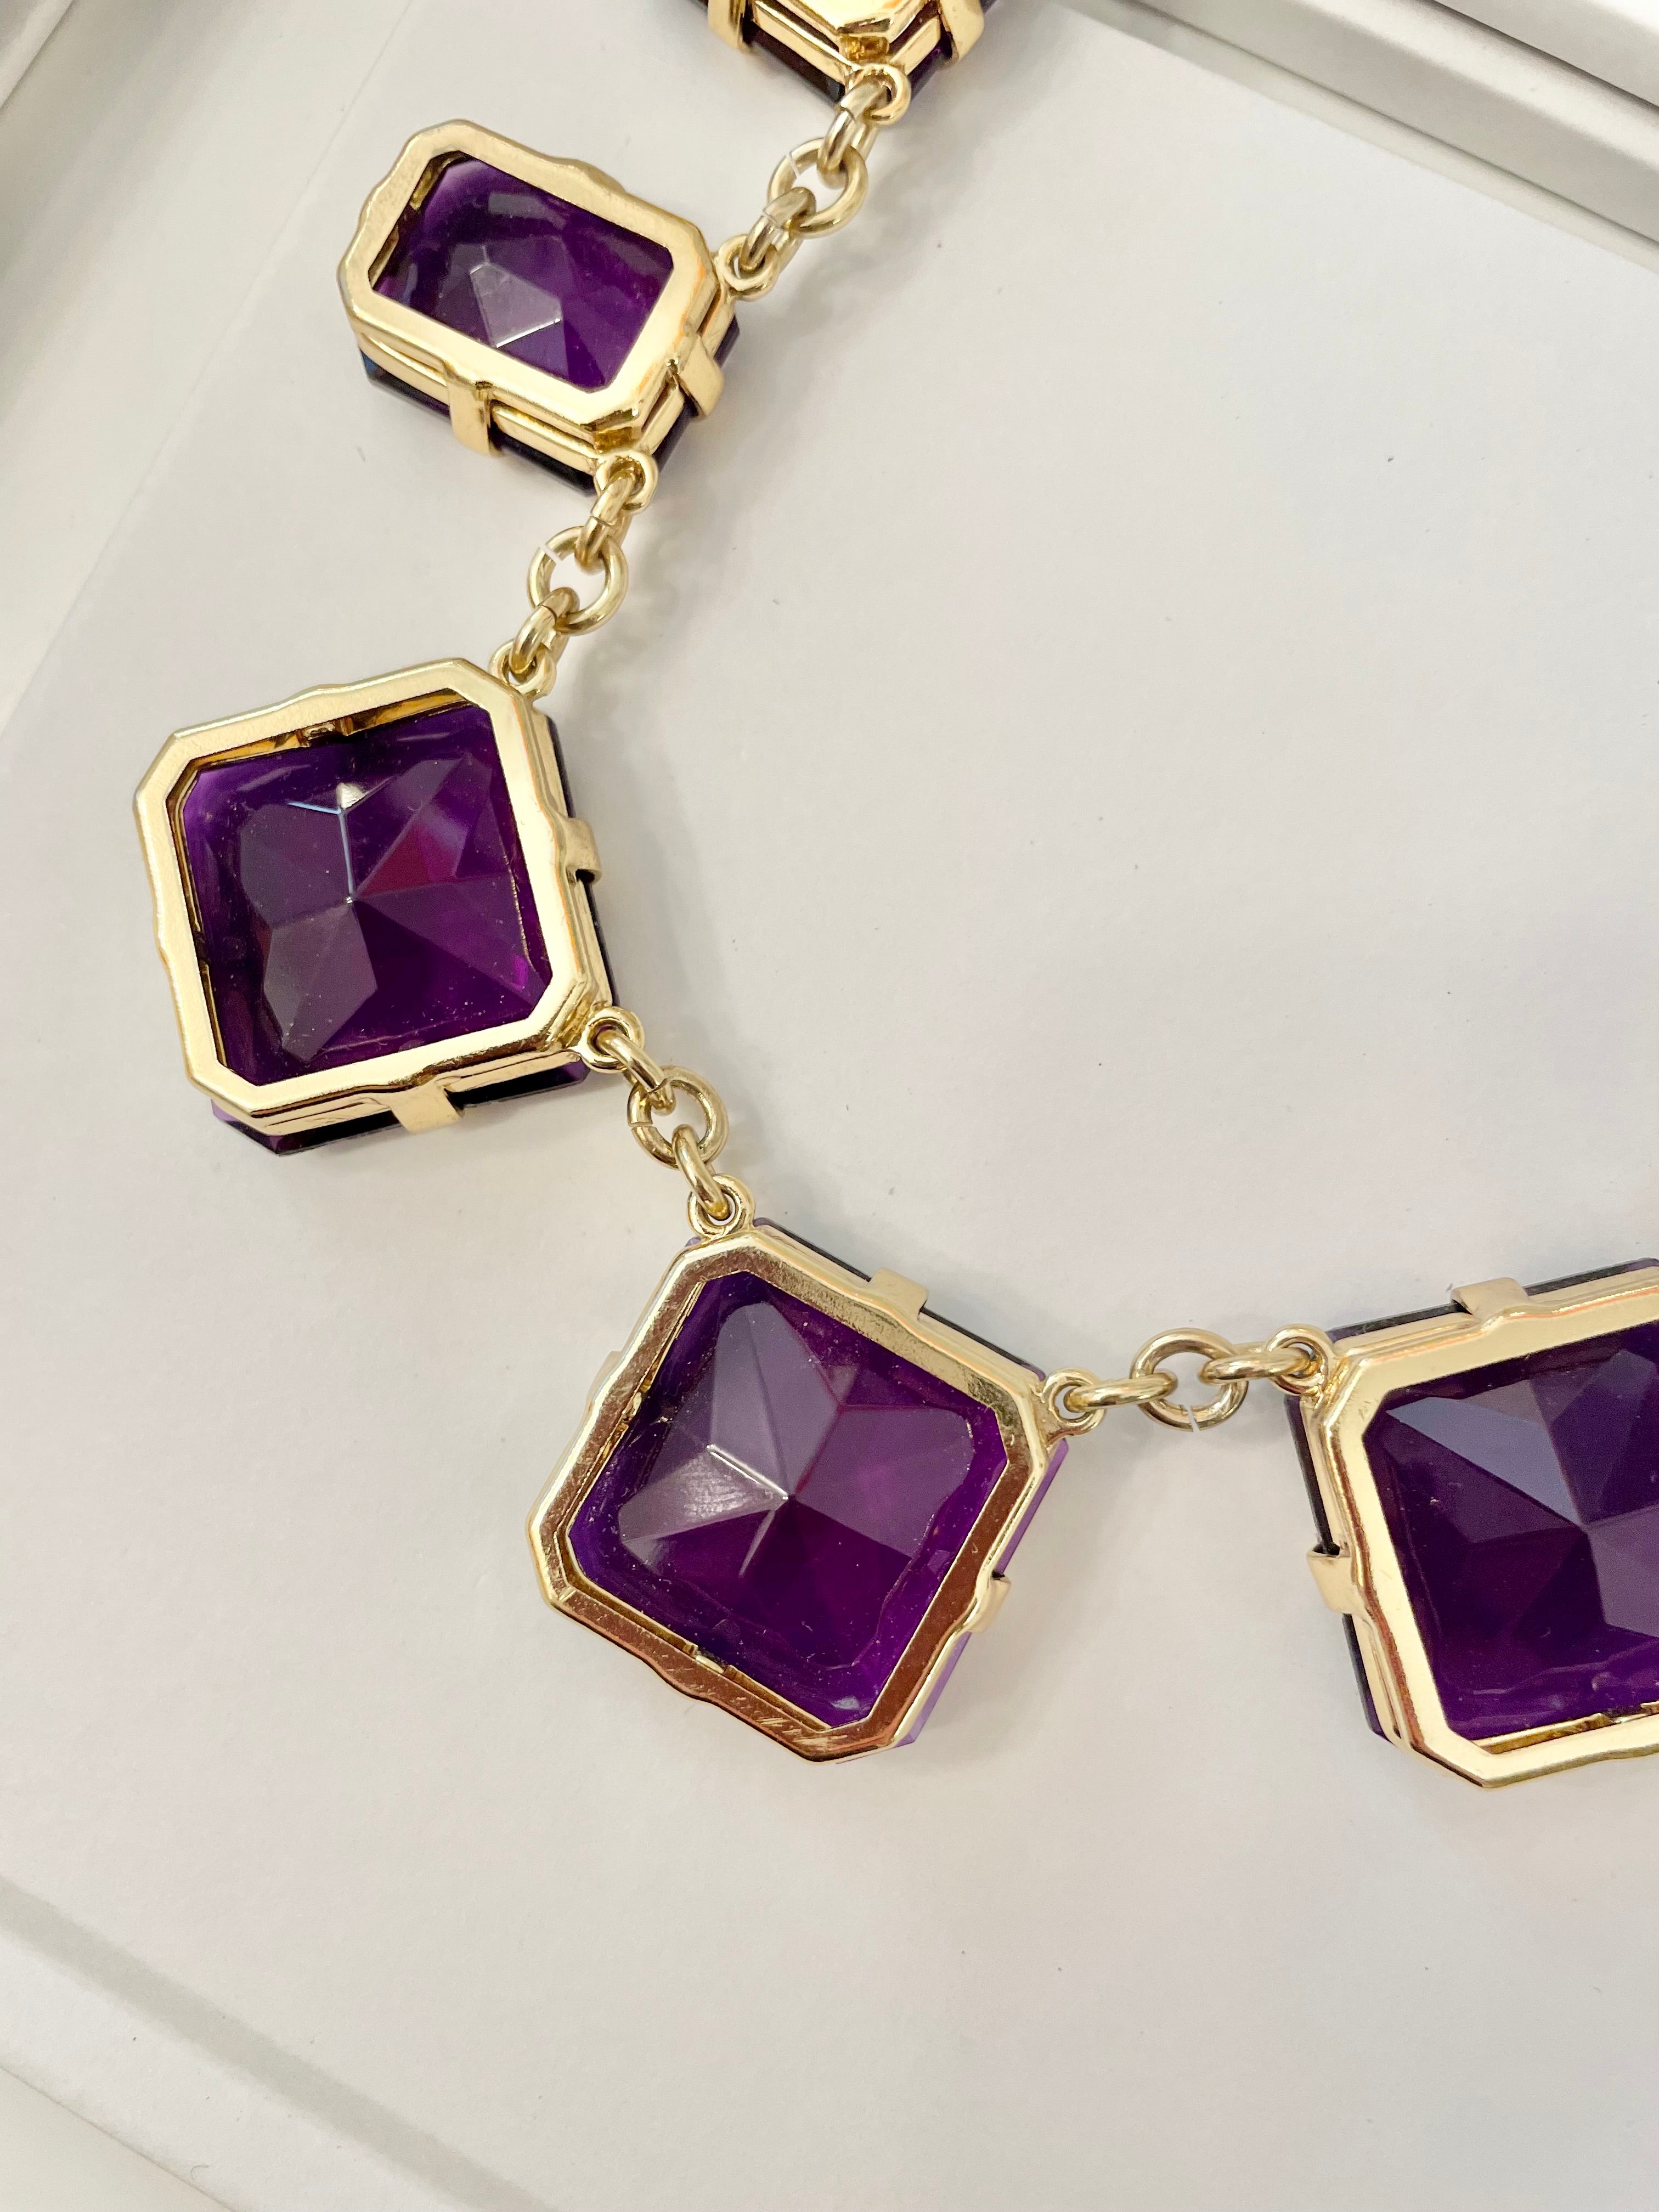 The Happy Hostess and her love affair with color. This stunning deep purple stone statement necklace is truly extraordinary!